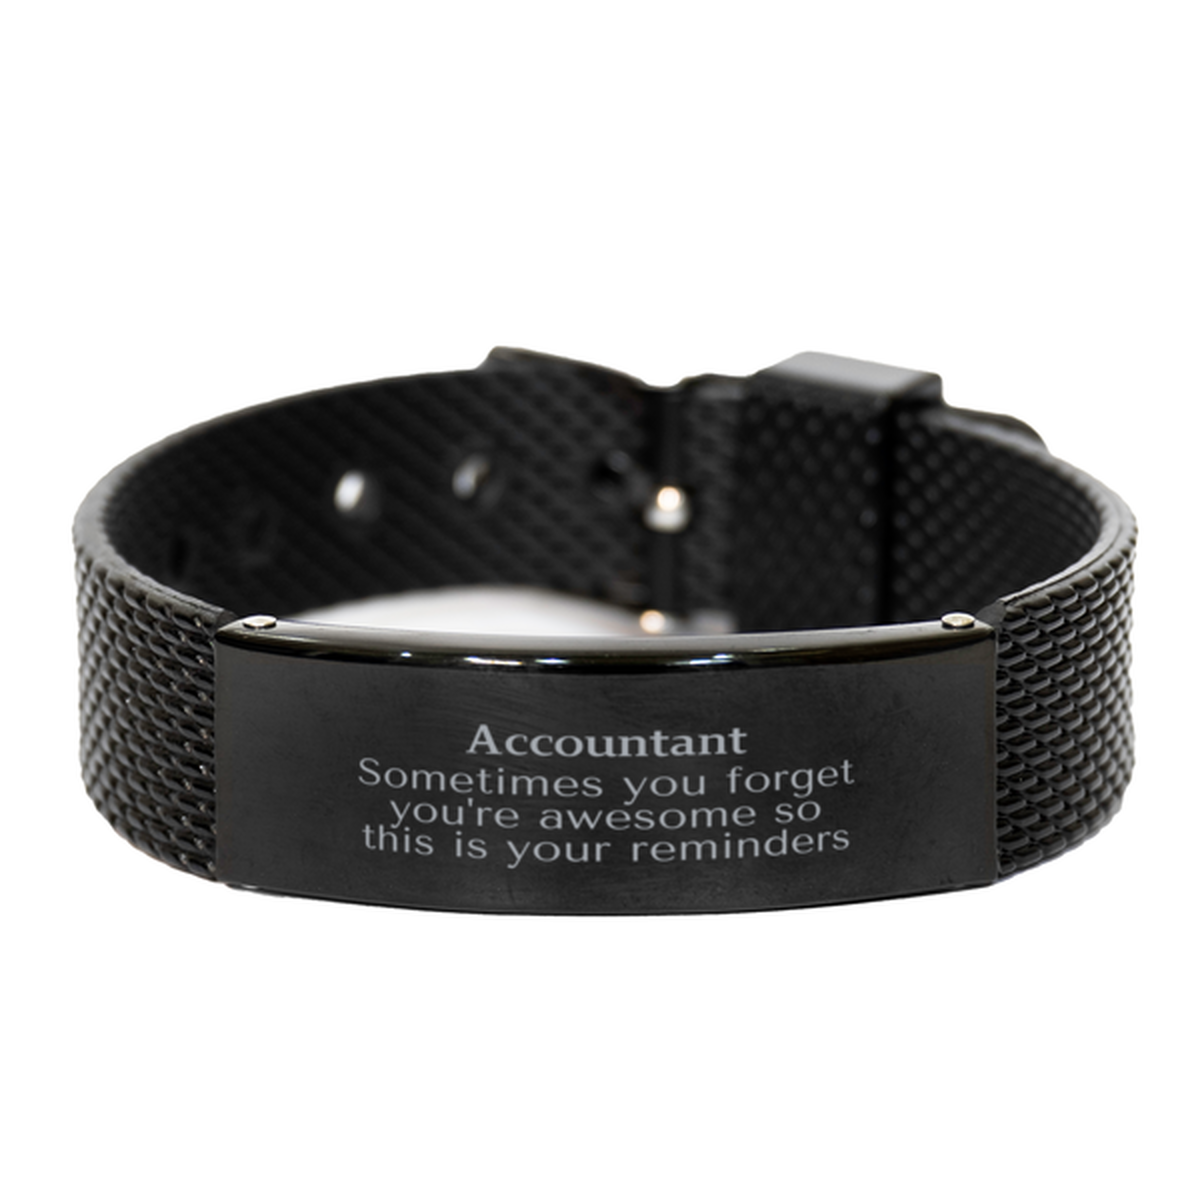 Sentimental Accountant Black Shark Mesh Bracelet, Accountant Sometimes you forget you're awesome so this is your reminders, Graduation Christmas Birthday Gifts for Accountant, Men, Women, Coworkers